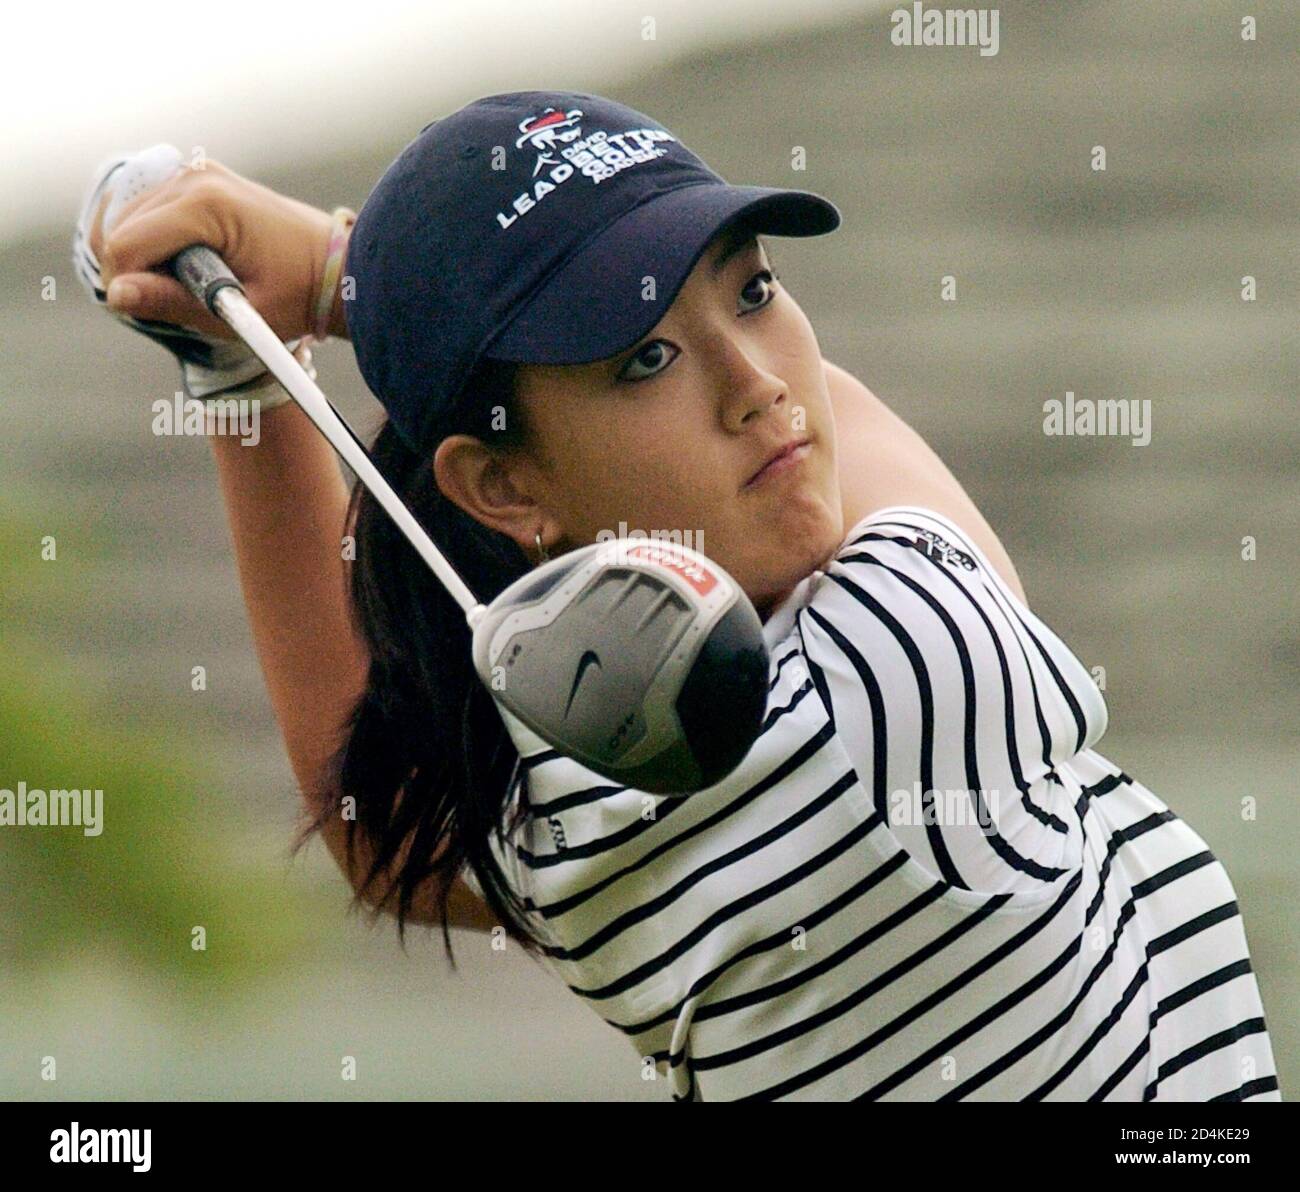 Michelle Wie of the U.S. watches her tee shot on the first hole during the quarter-final round of match play in the 2005 United States Amateur Public Links Championship at Shaker Run Golf Club in Lebanon, Ohio, July 15, 2005. Wie lost to compatriot Clay Ogden 5 and 4 on the 14th green. REUTERS/John Sommers II  JPS/TC Stock Photo